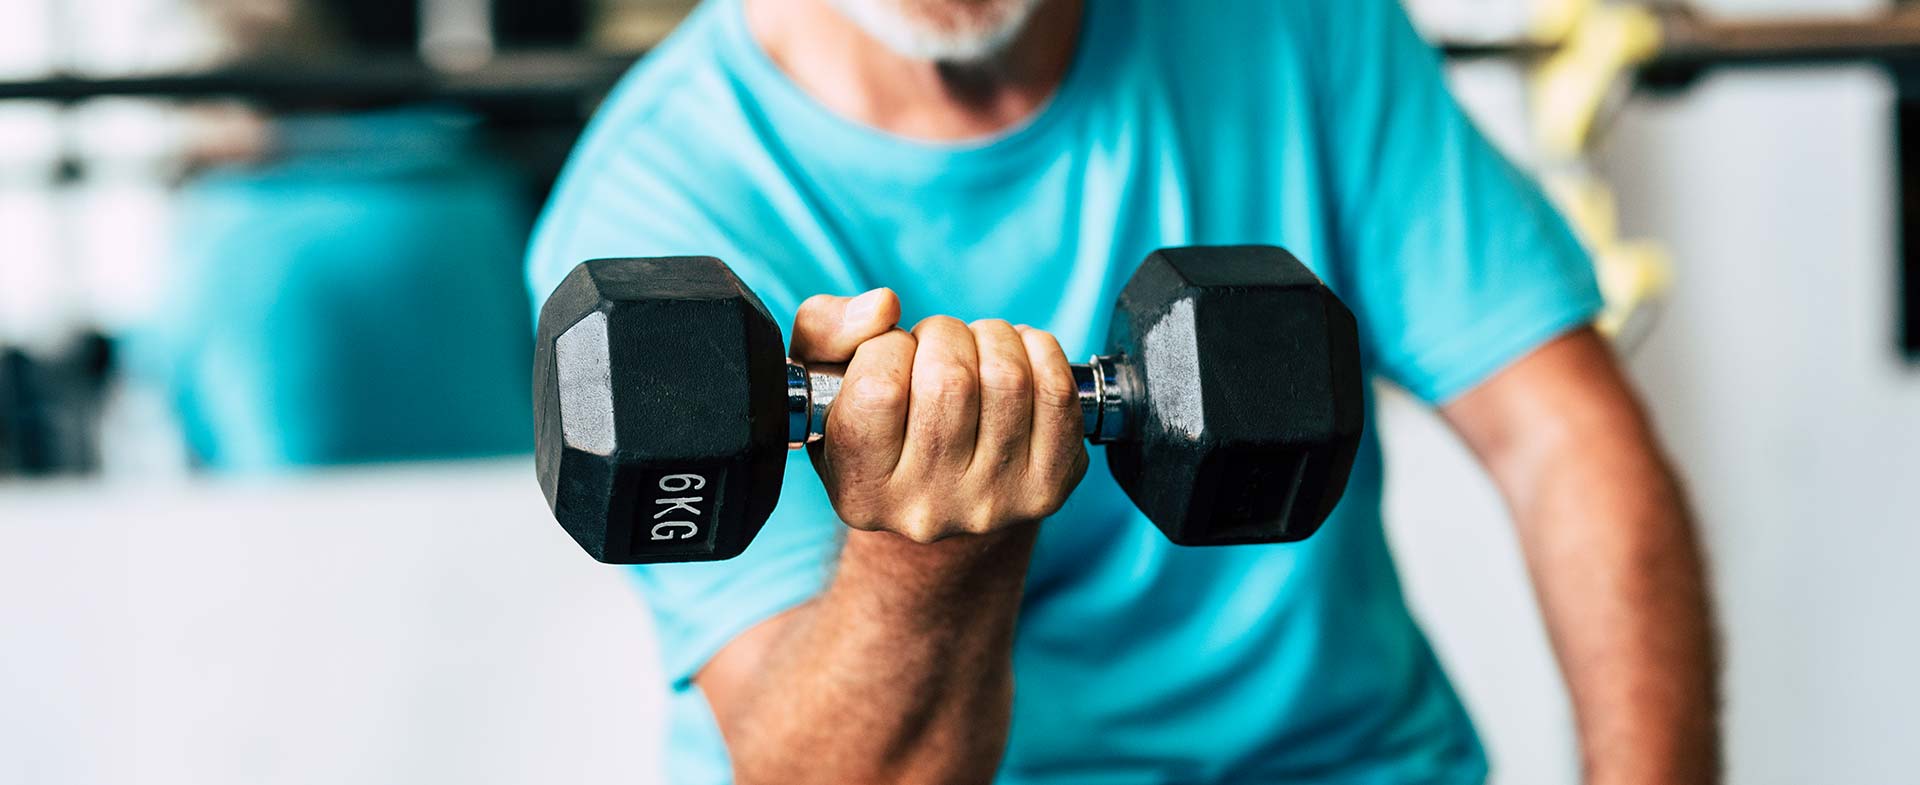 Over 50? Avoid age-related muscle loss